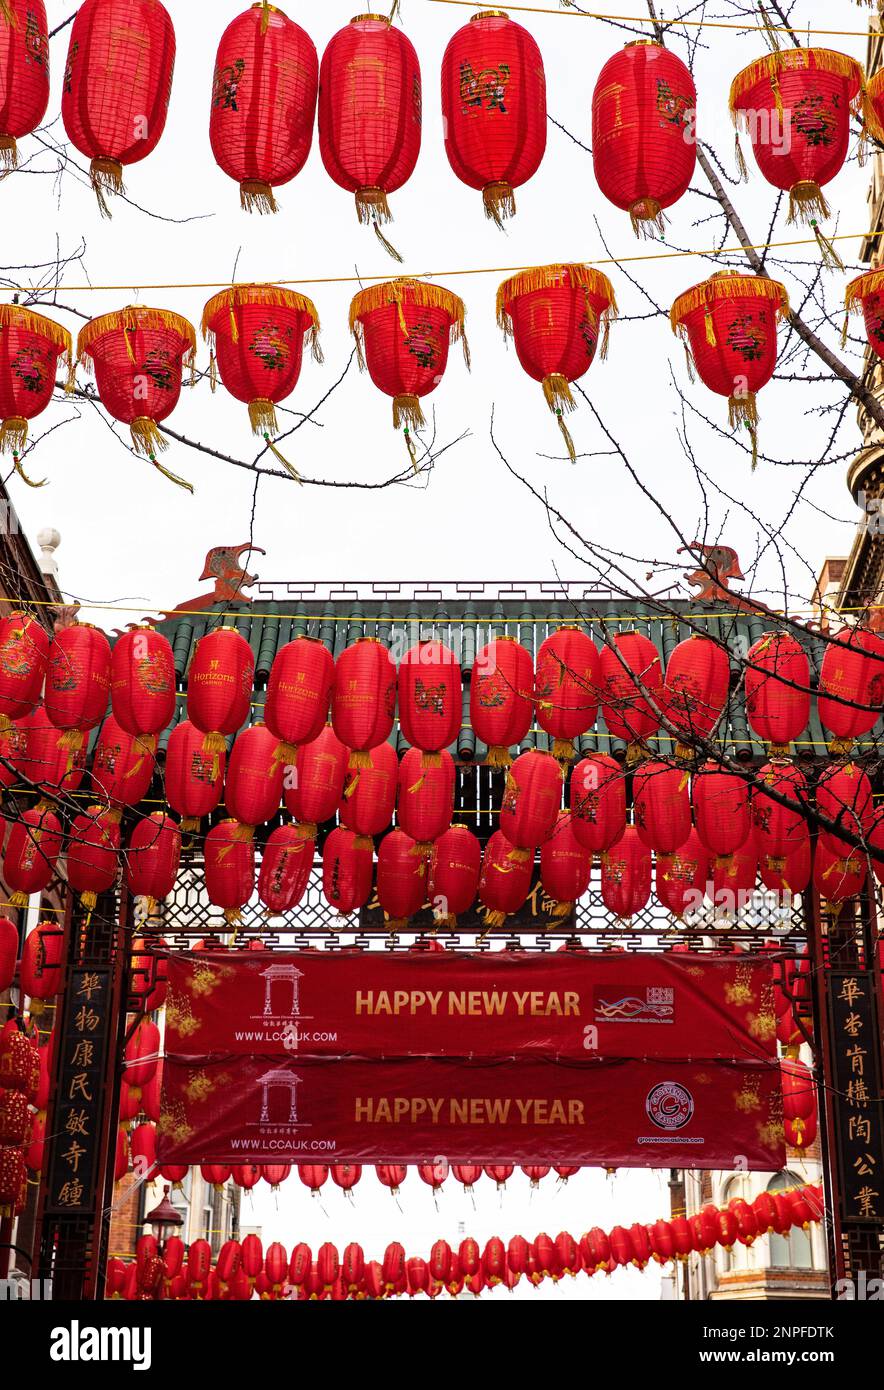 Red Chinese lanterns adorn one of the gates to Chinatown in London during the Chinese New Year celebrations Stock Photo